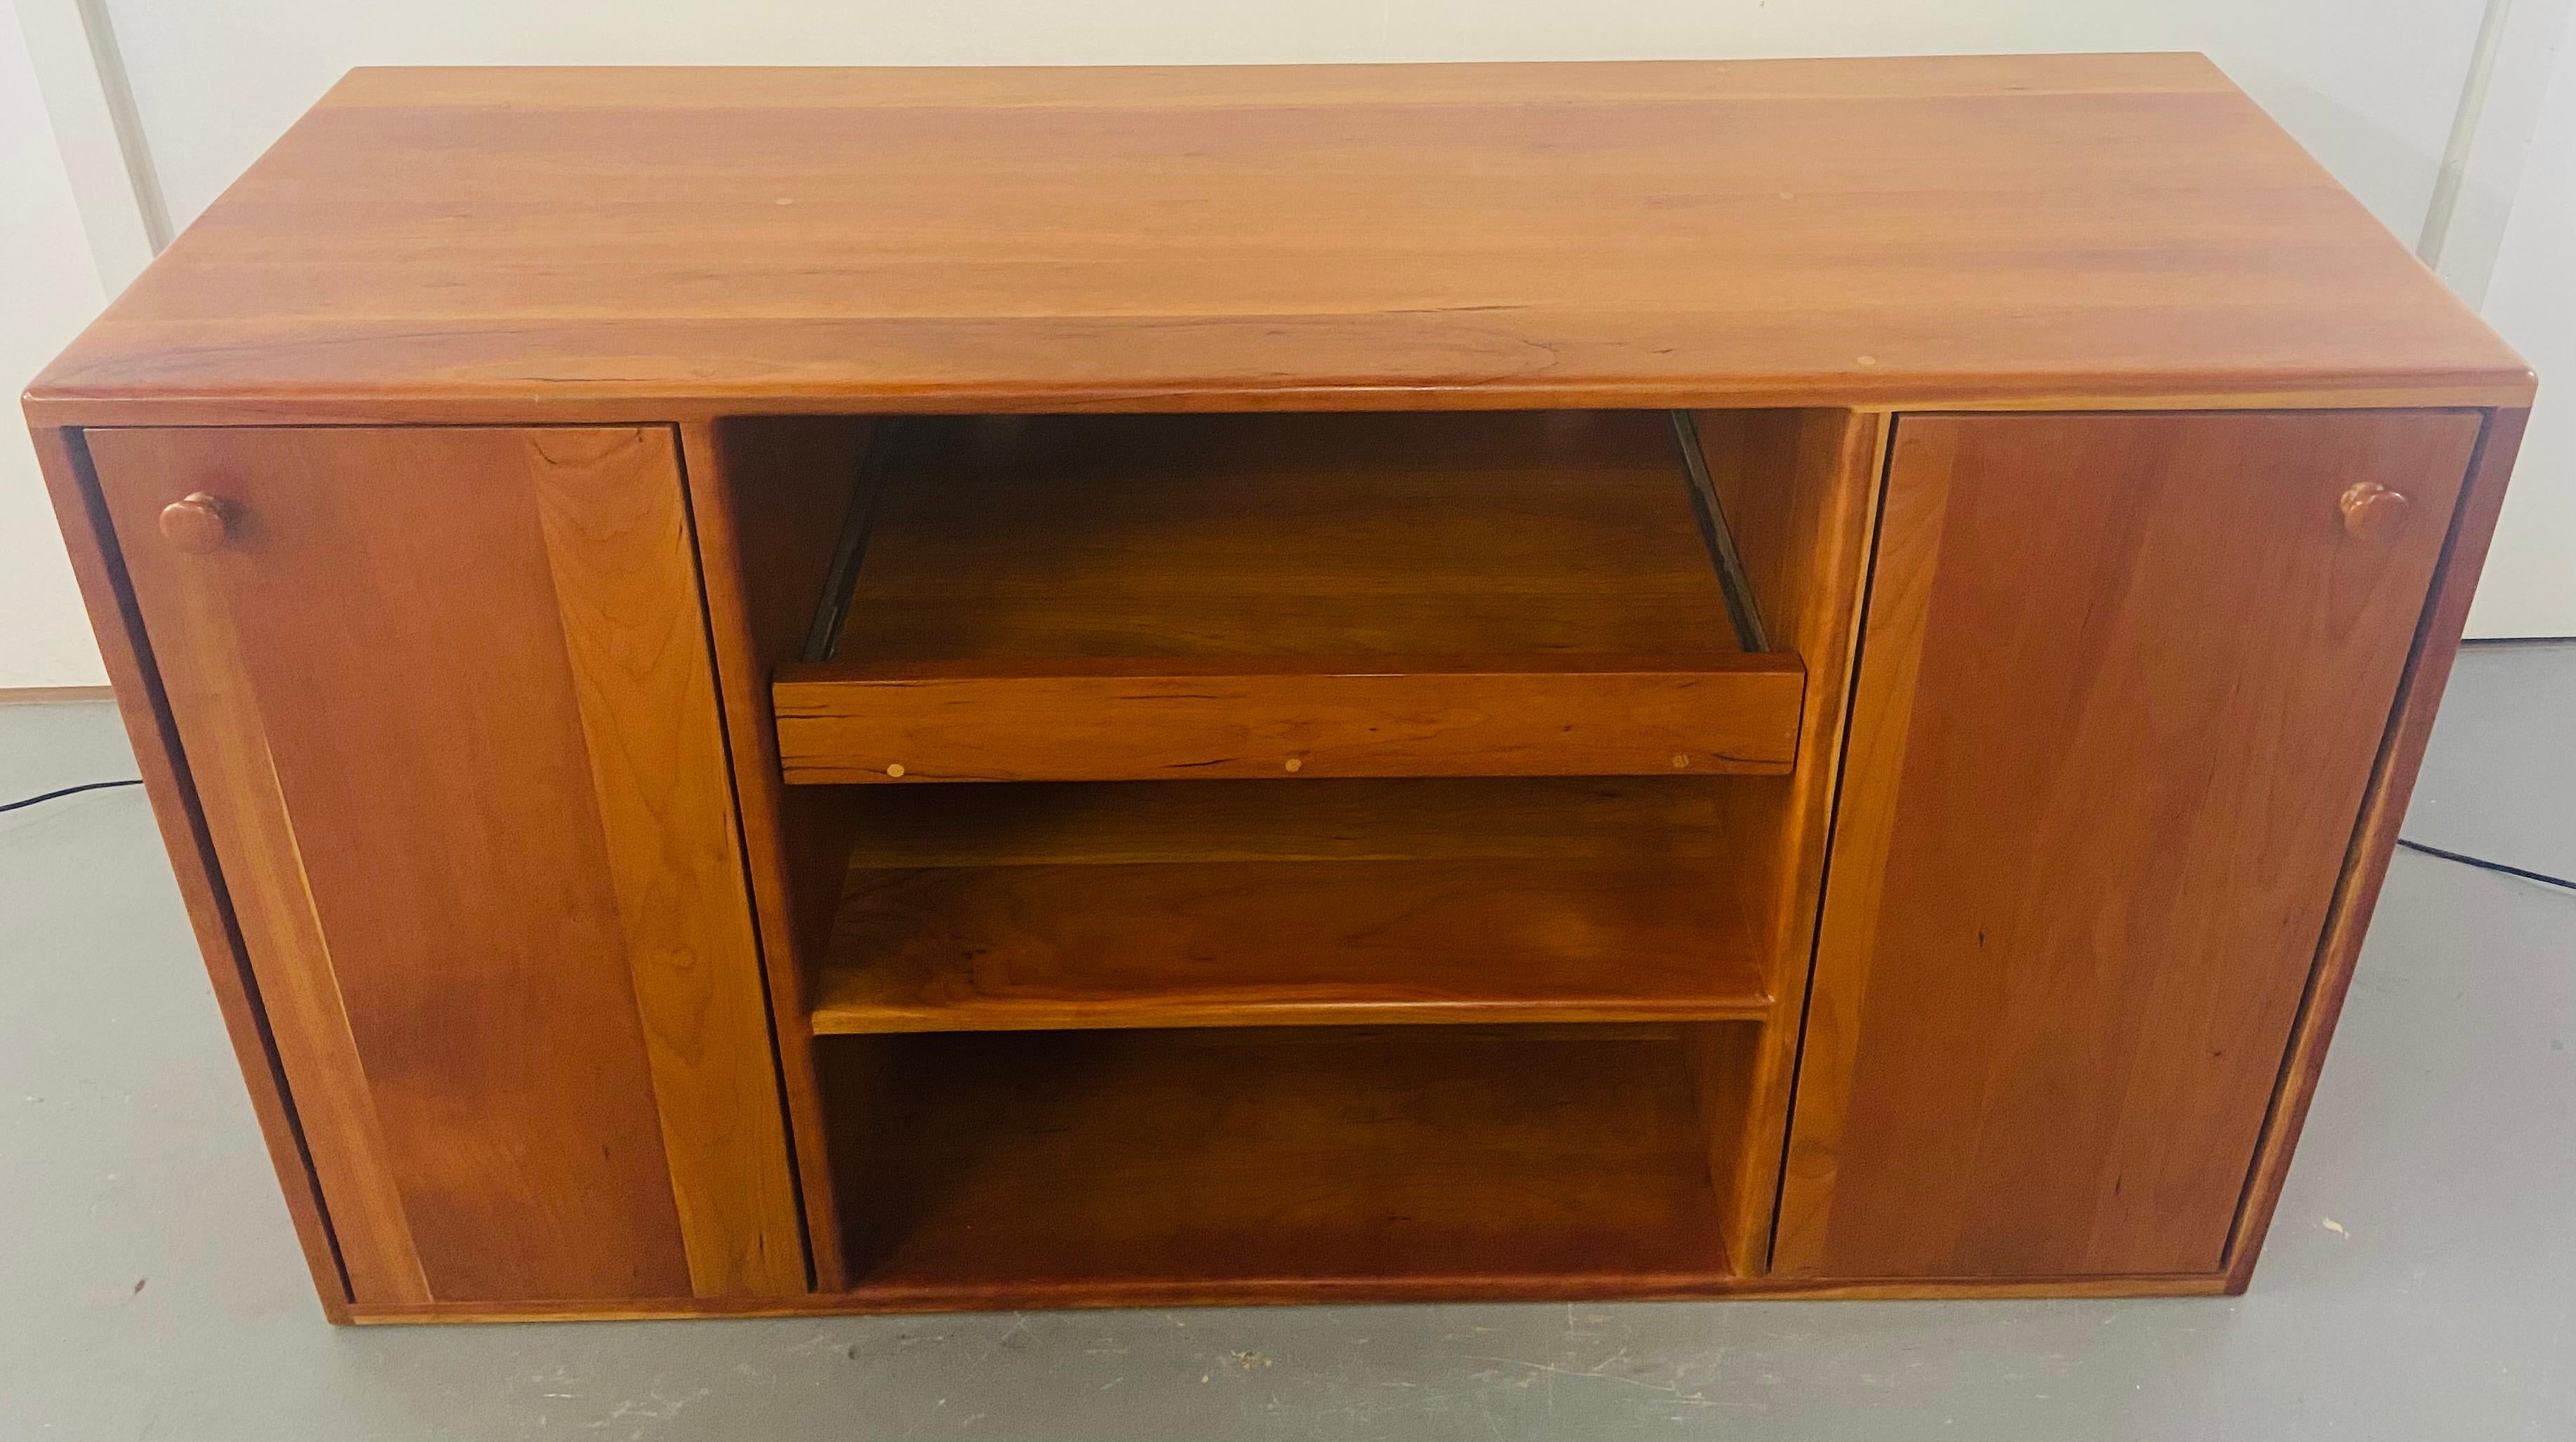 American Mid-Century Modern Pompanoosuc Mills Cherrywood Stereo Cabinet or Sideboard